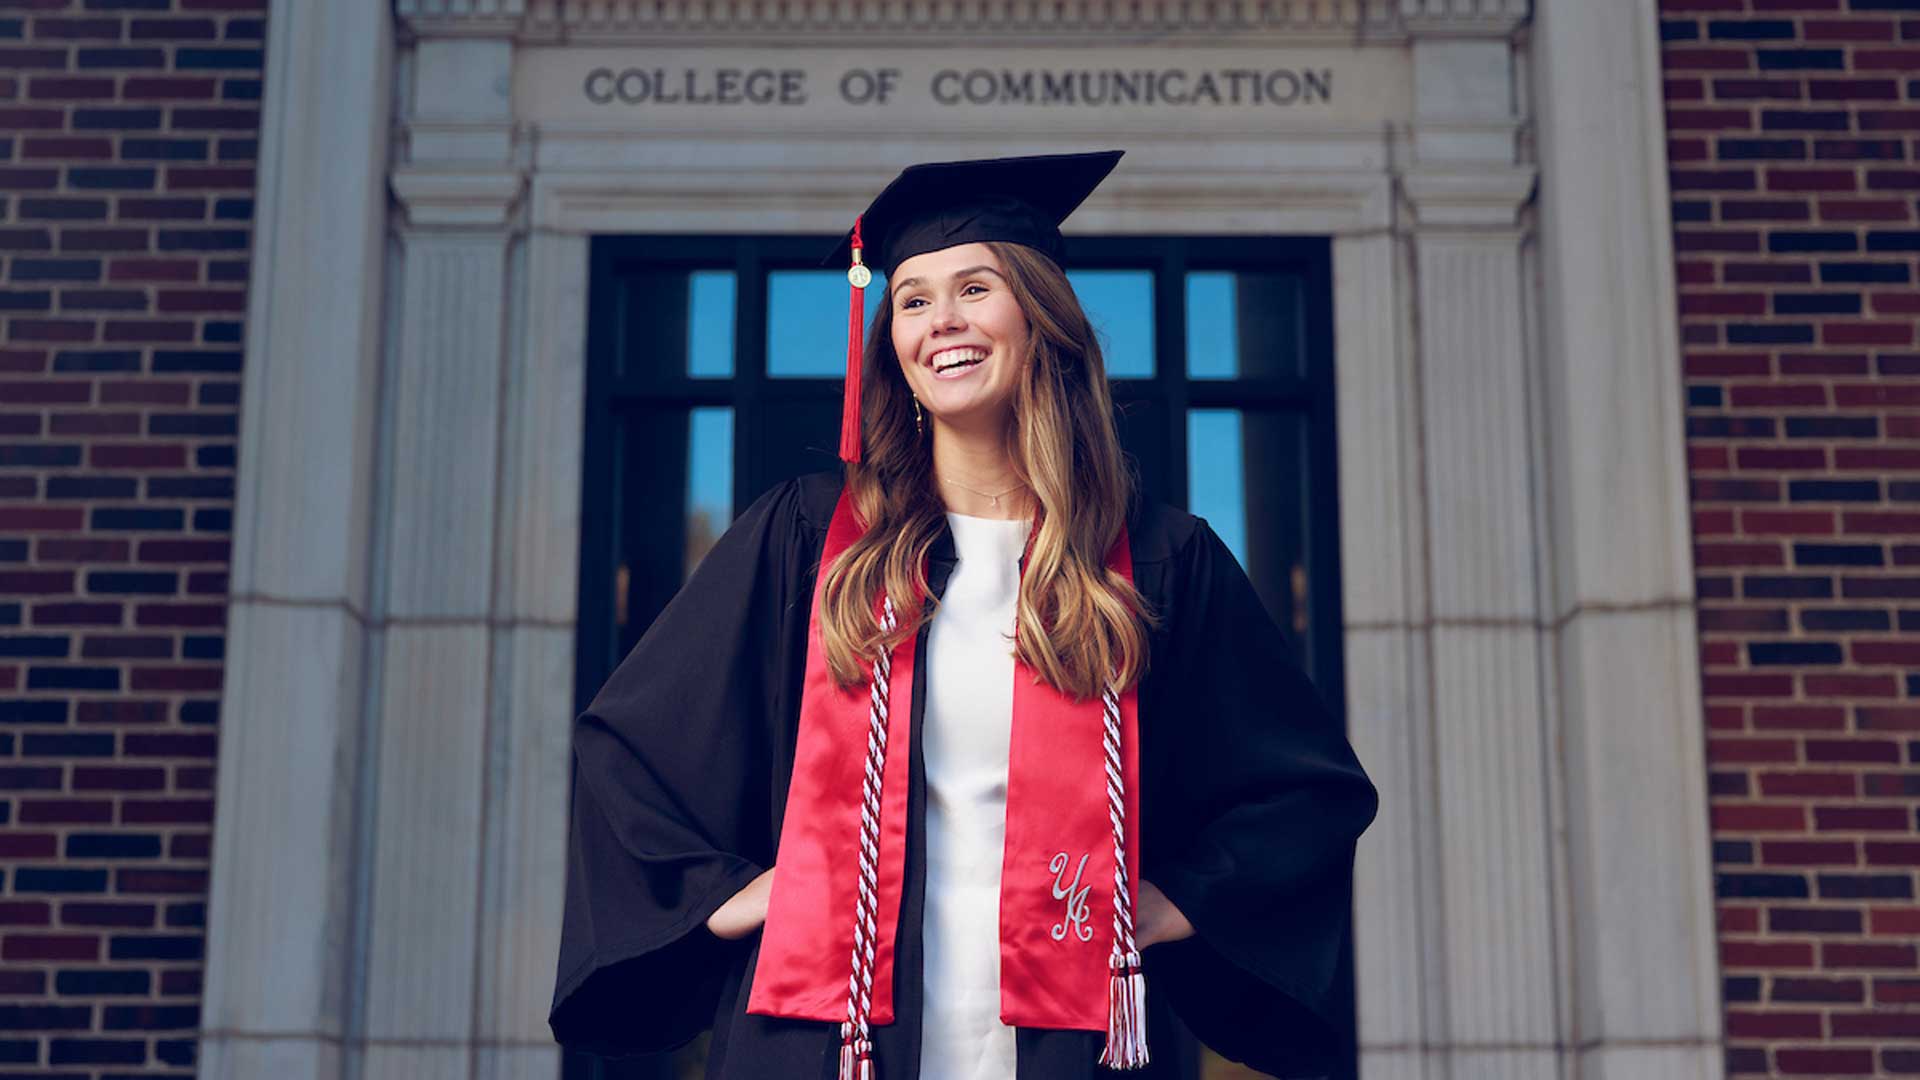 A girl with light to medium brown hair poses next to a concrete pillar while dressed in a cap and gown.